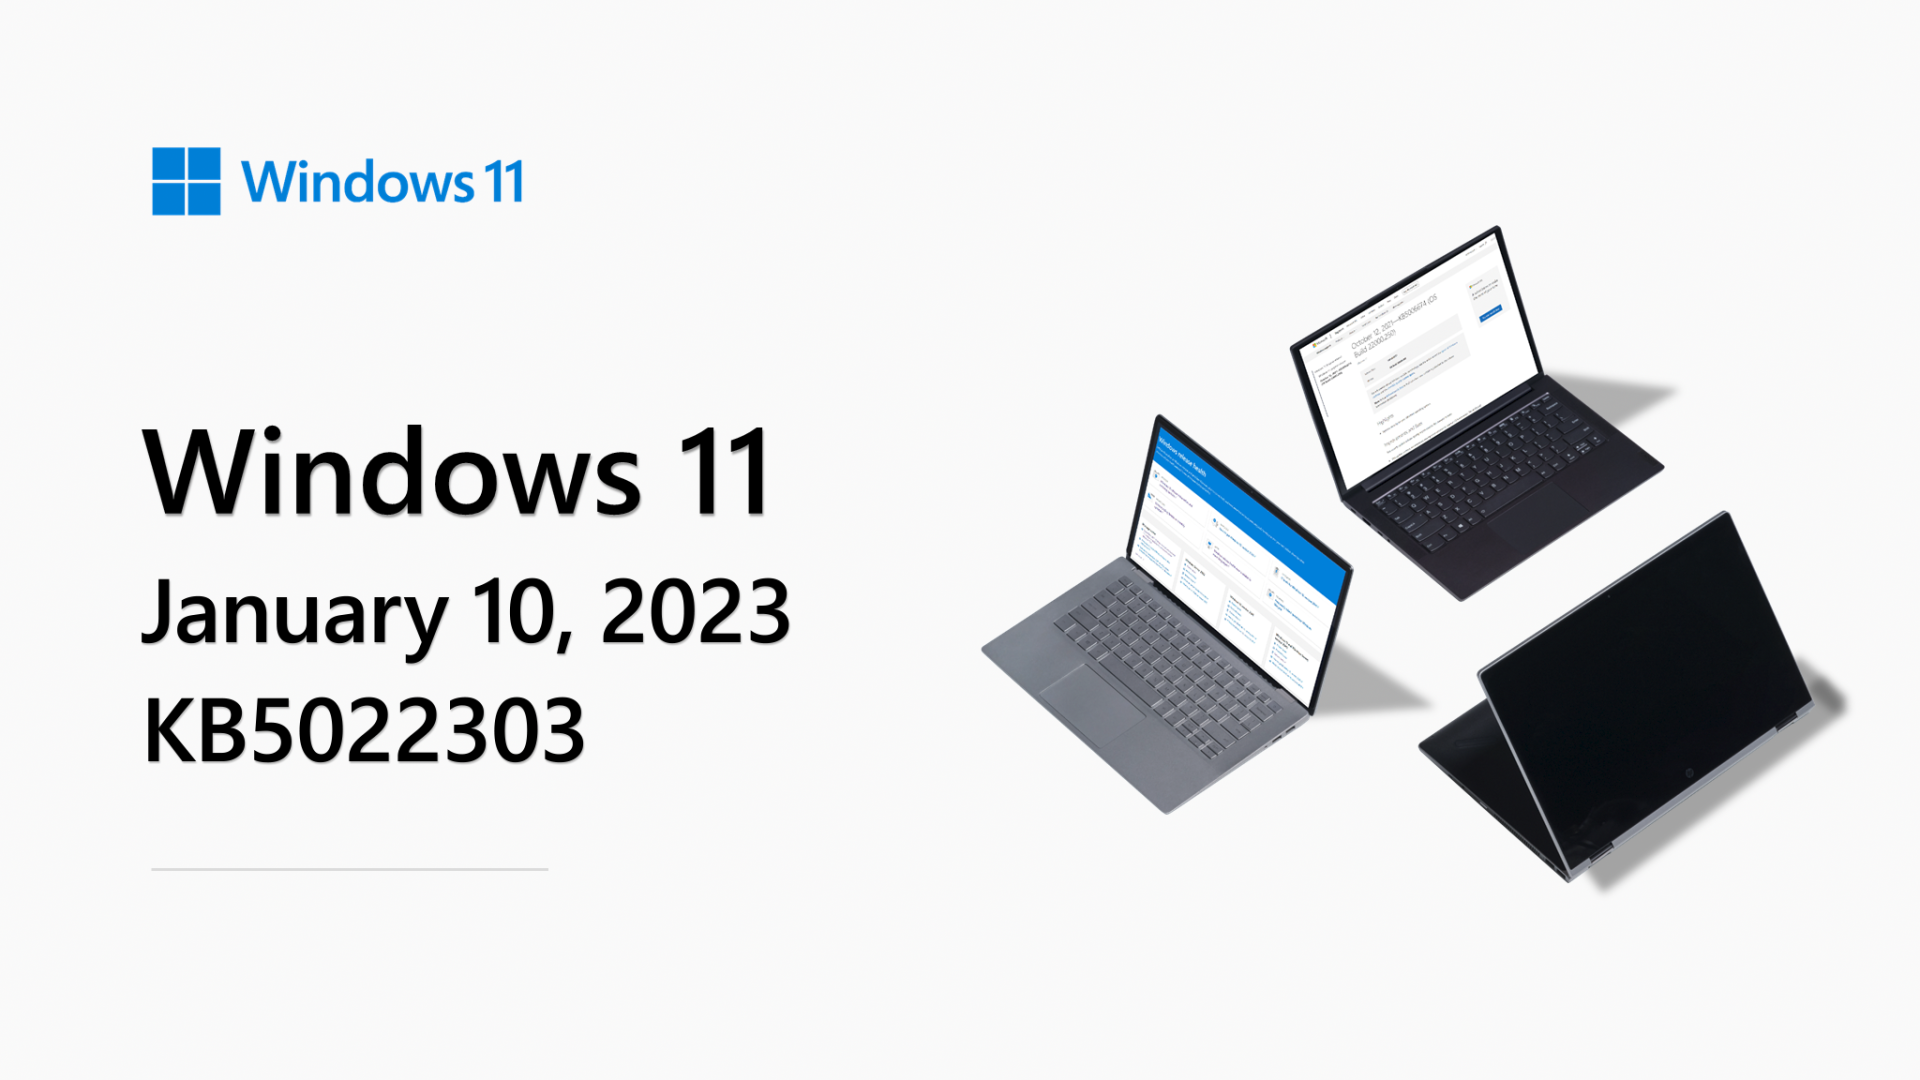 January 10, 2023—KB5022303 (OS Build 22621.1105) - Microsoft Support